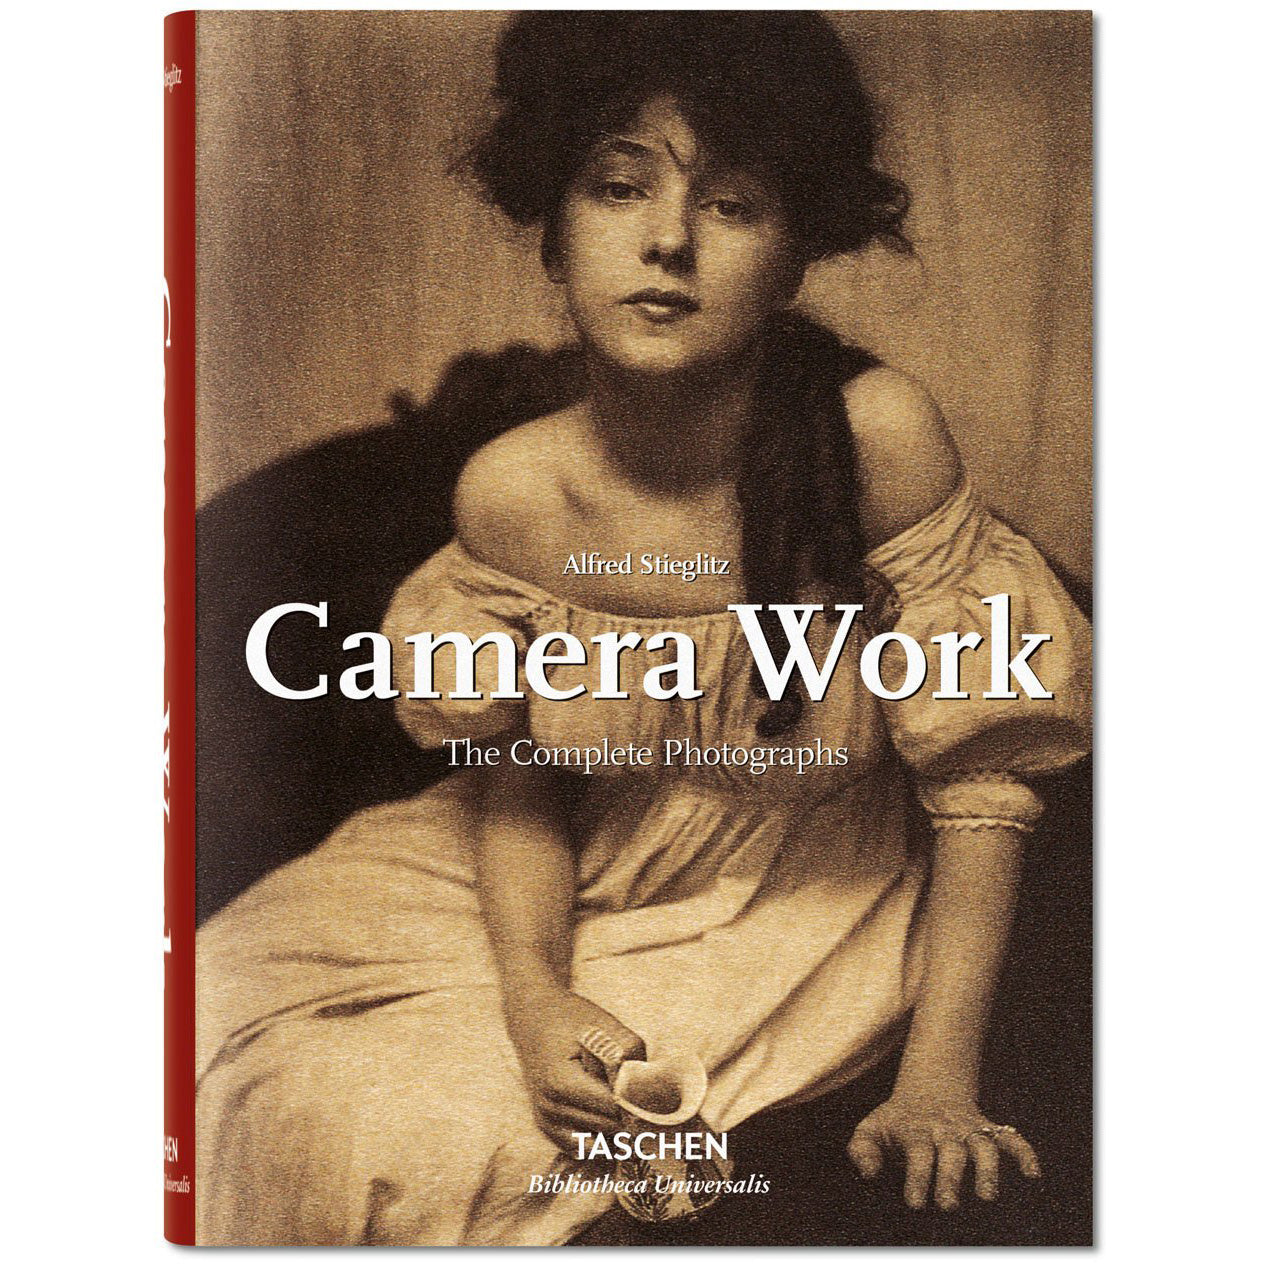 Camera Work: The Complete Photographs by Alfred Stieglitz